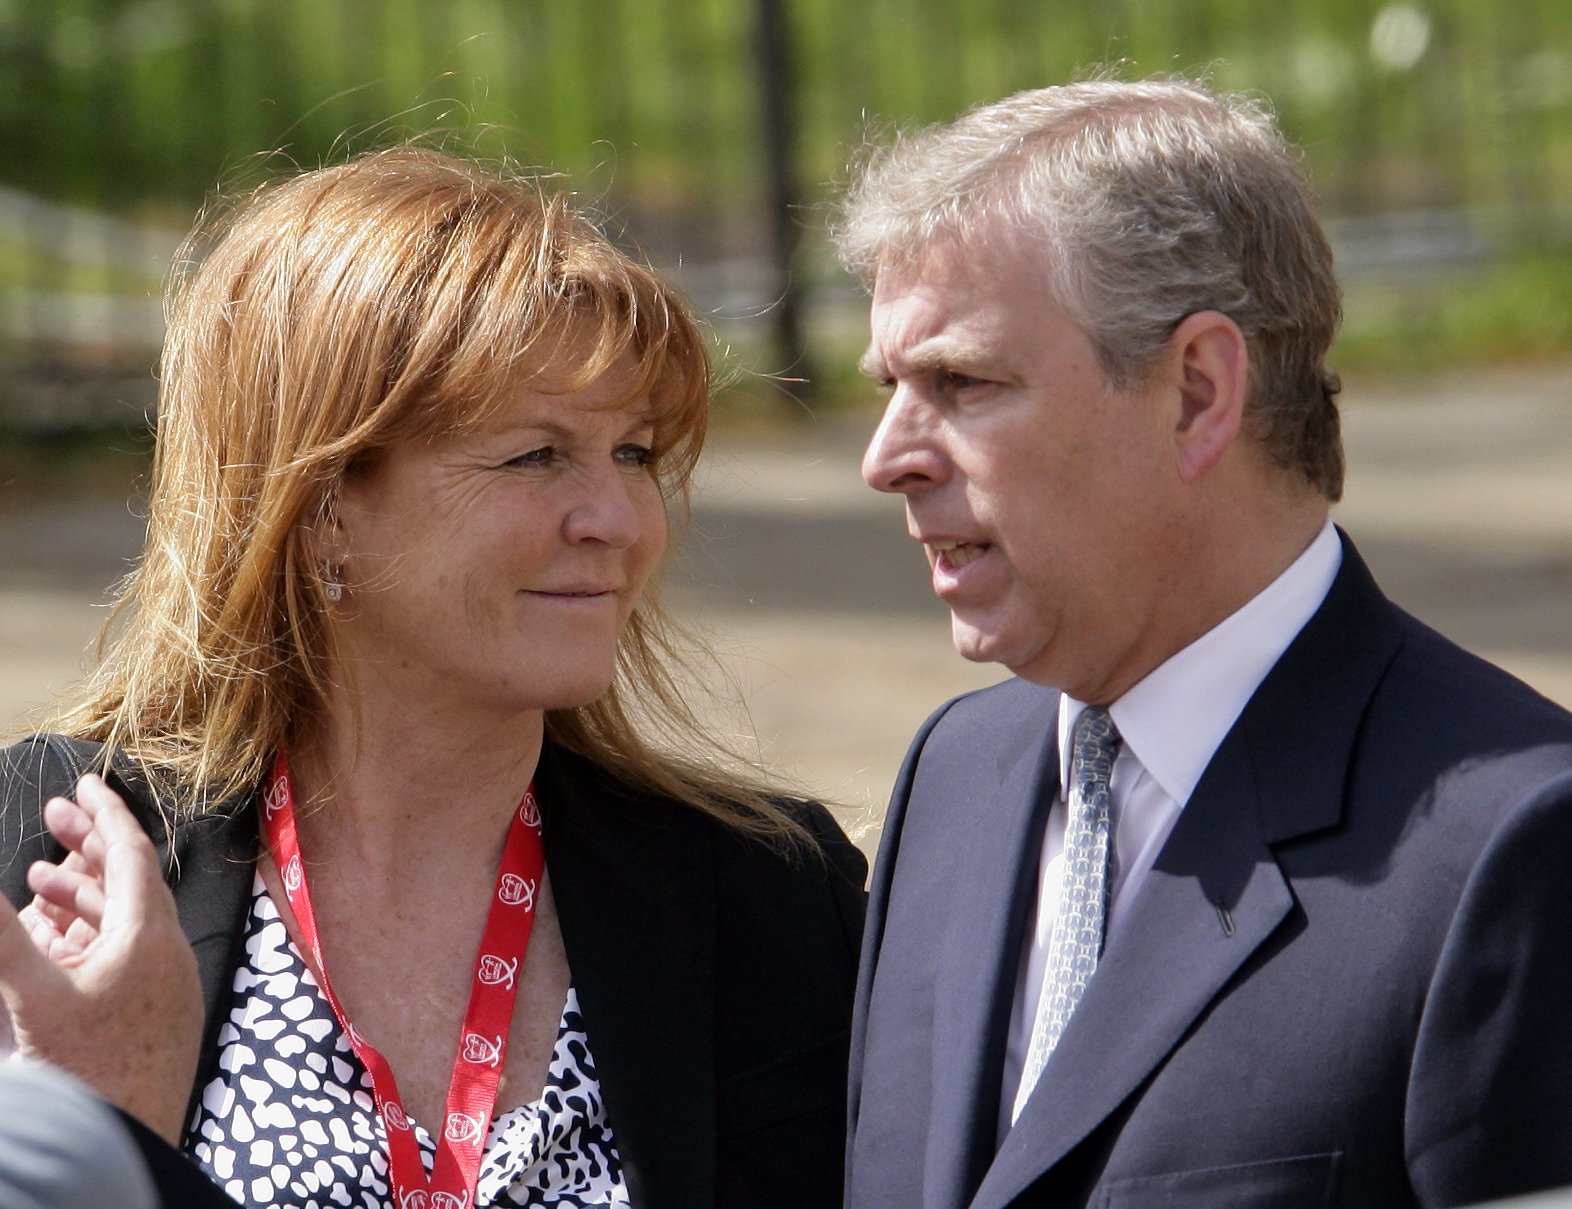 Sarah Ferguson, The Duchess of York talks with ex-husband HRH Prince Andrew, The Duke of York as they wait for daughter HRH Princess Beatrice of York to complete the Virgin London Marathon as part of the 'Caterpillar Run' Team, consisting of 32 runners tethered together on April 25, 2010 in London, England. | Source: Getty Images